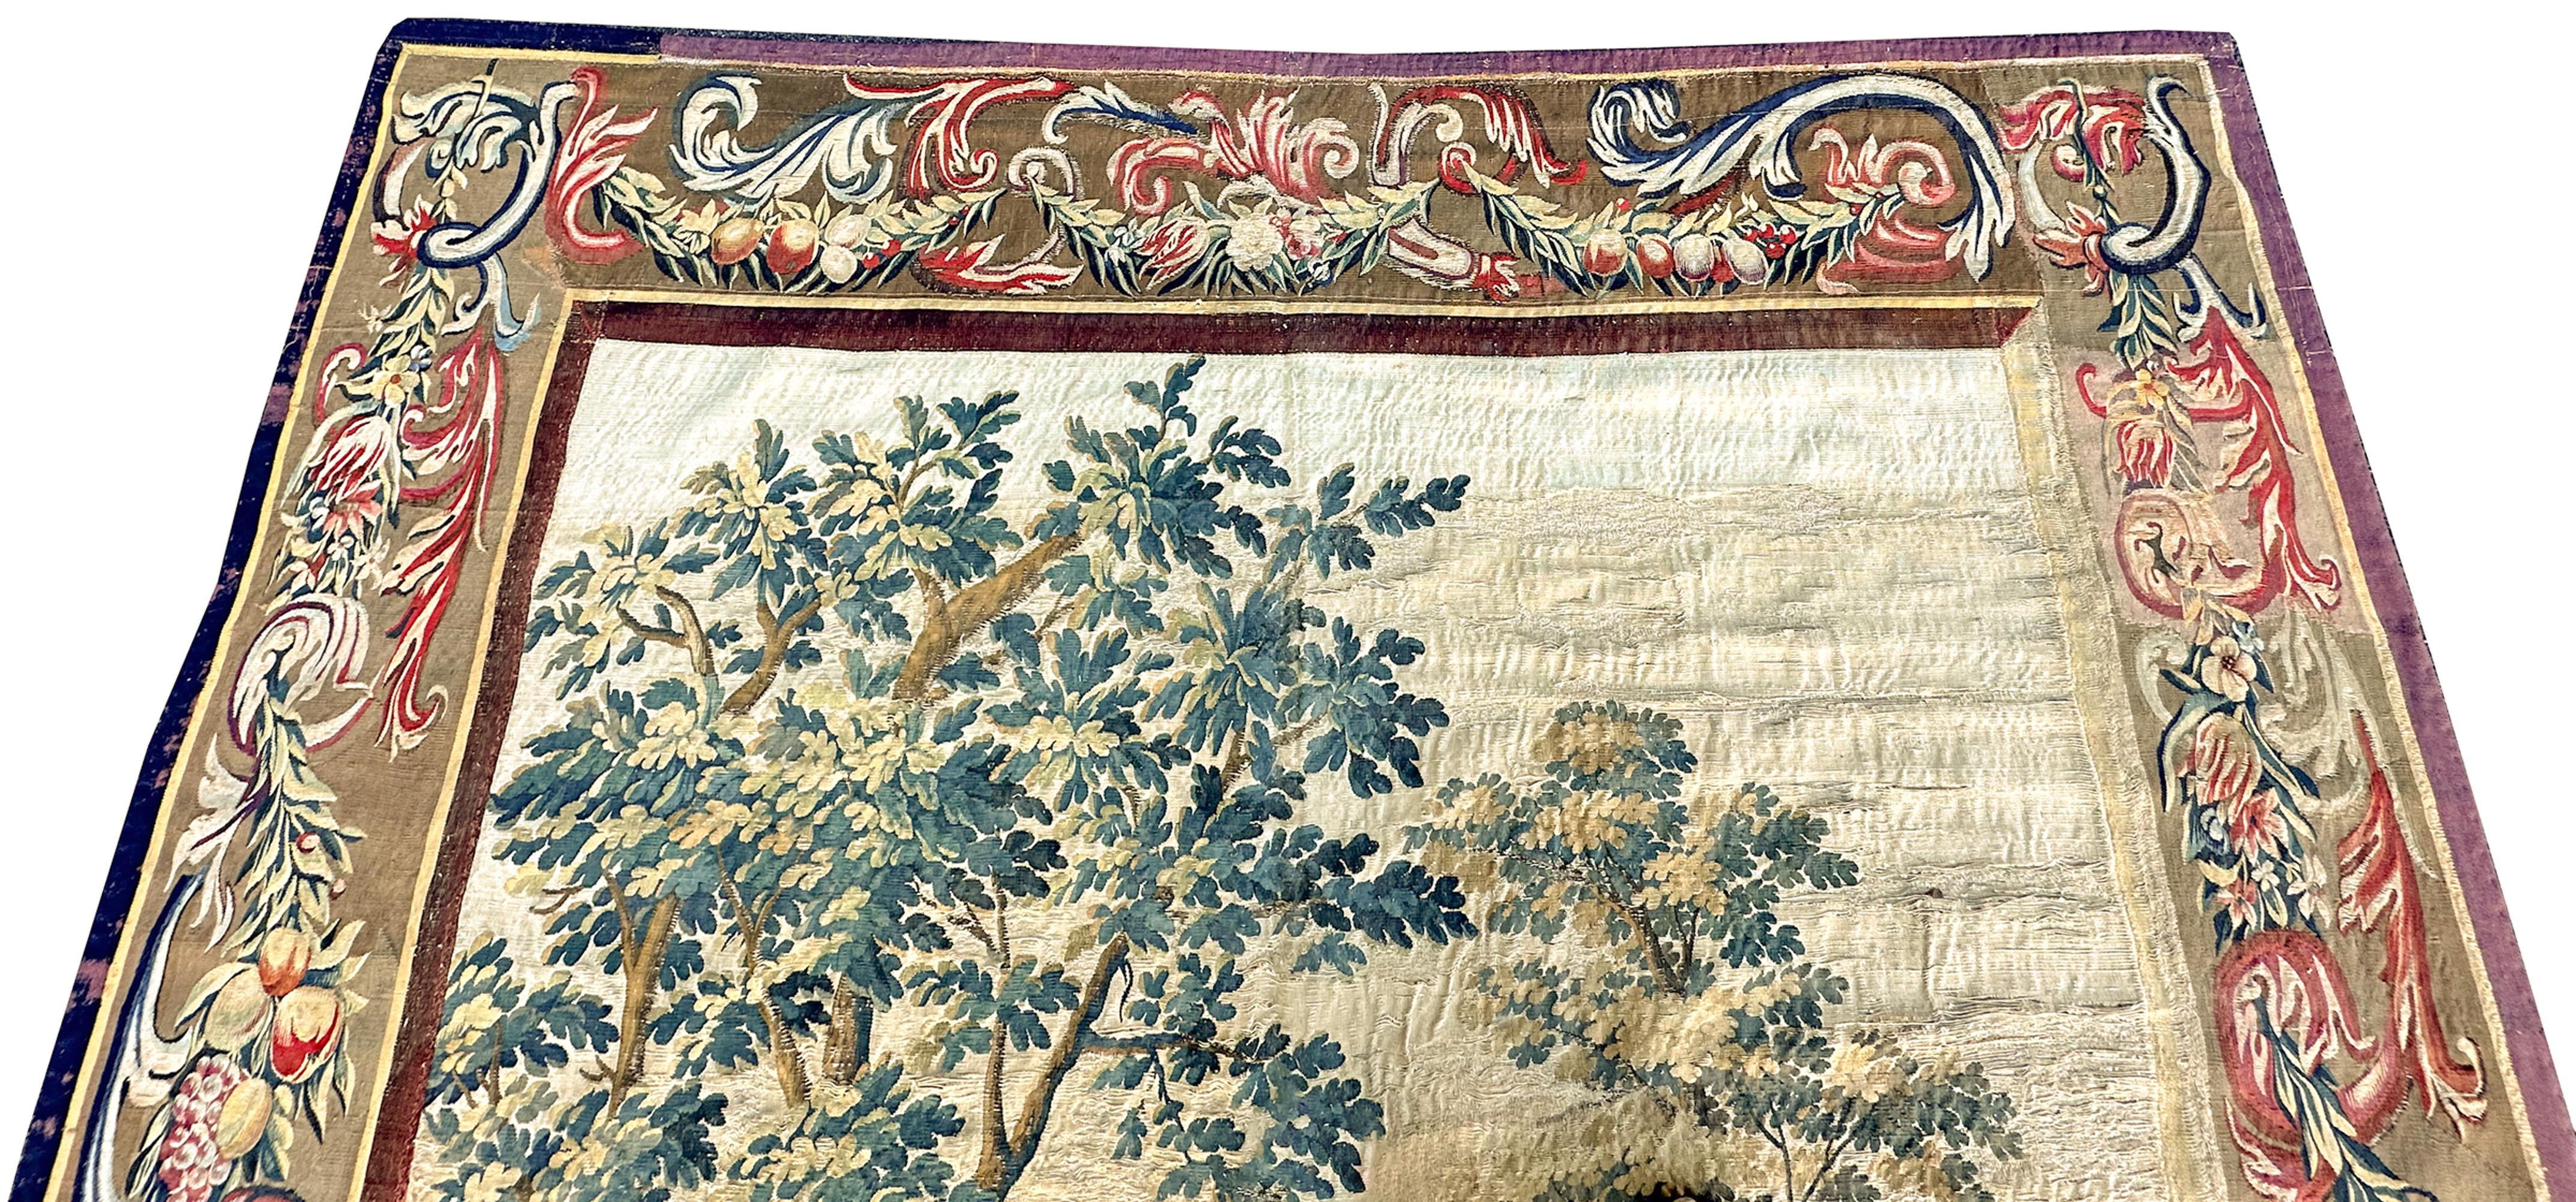 Hand-Woven 18th Century Antique French Tapestry Verdure Wool & Silk 7x11ft 213cm x 323cm For Sale